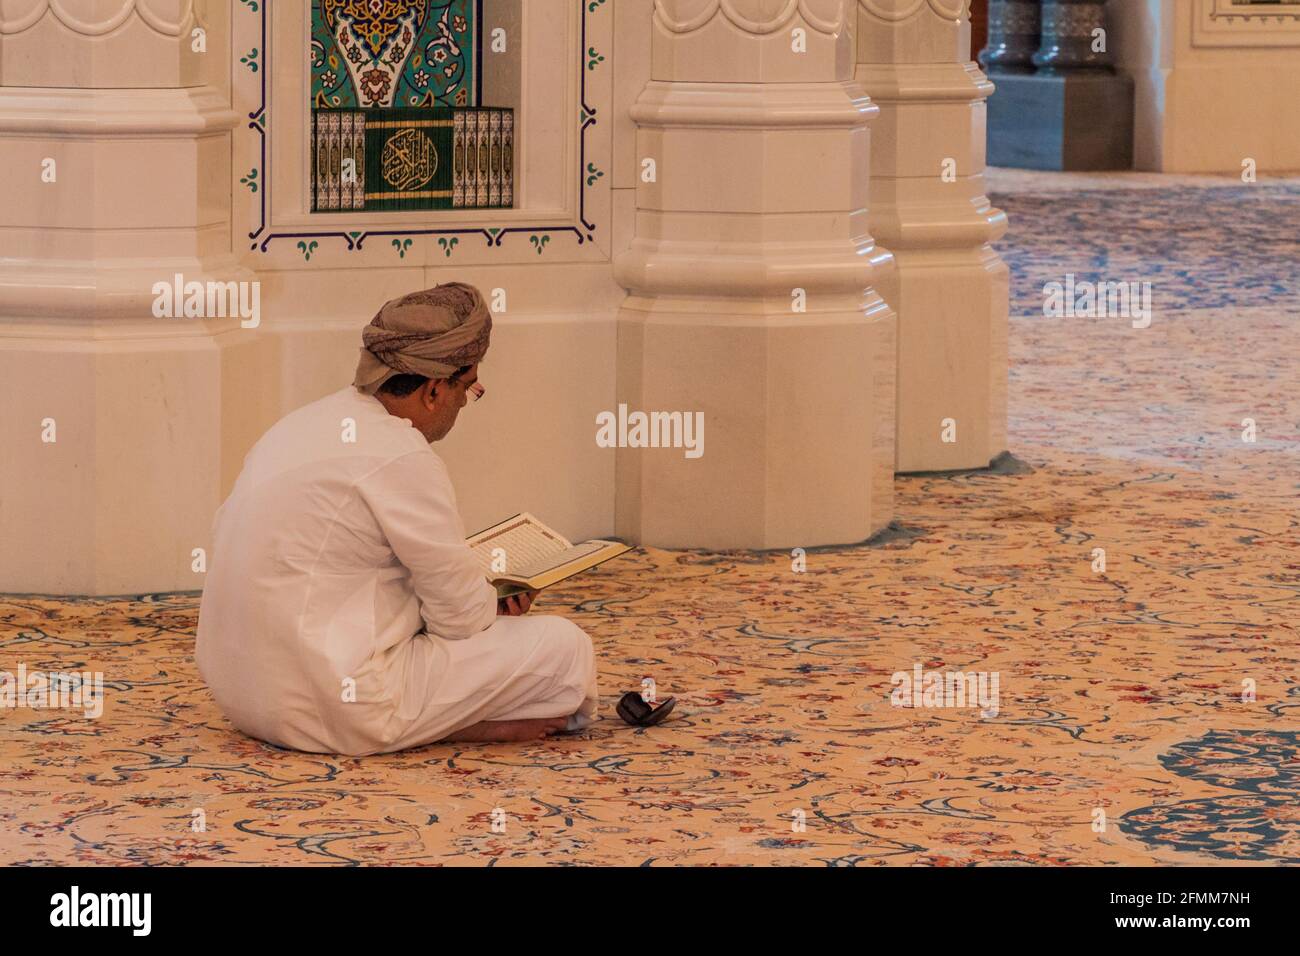 MUSCAT, OMAN - FEBRUARY 22, 2017: Local man in Sultan Qaboos Grand Mosque in Muscat, Oman Stock Photo